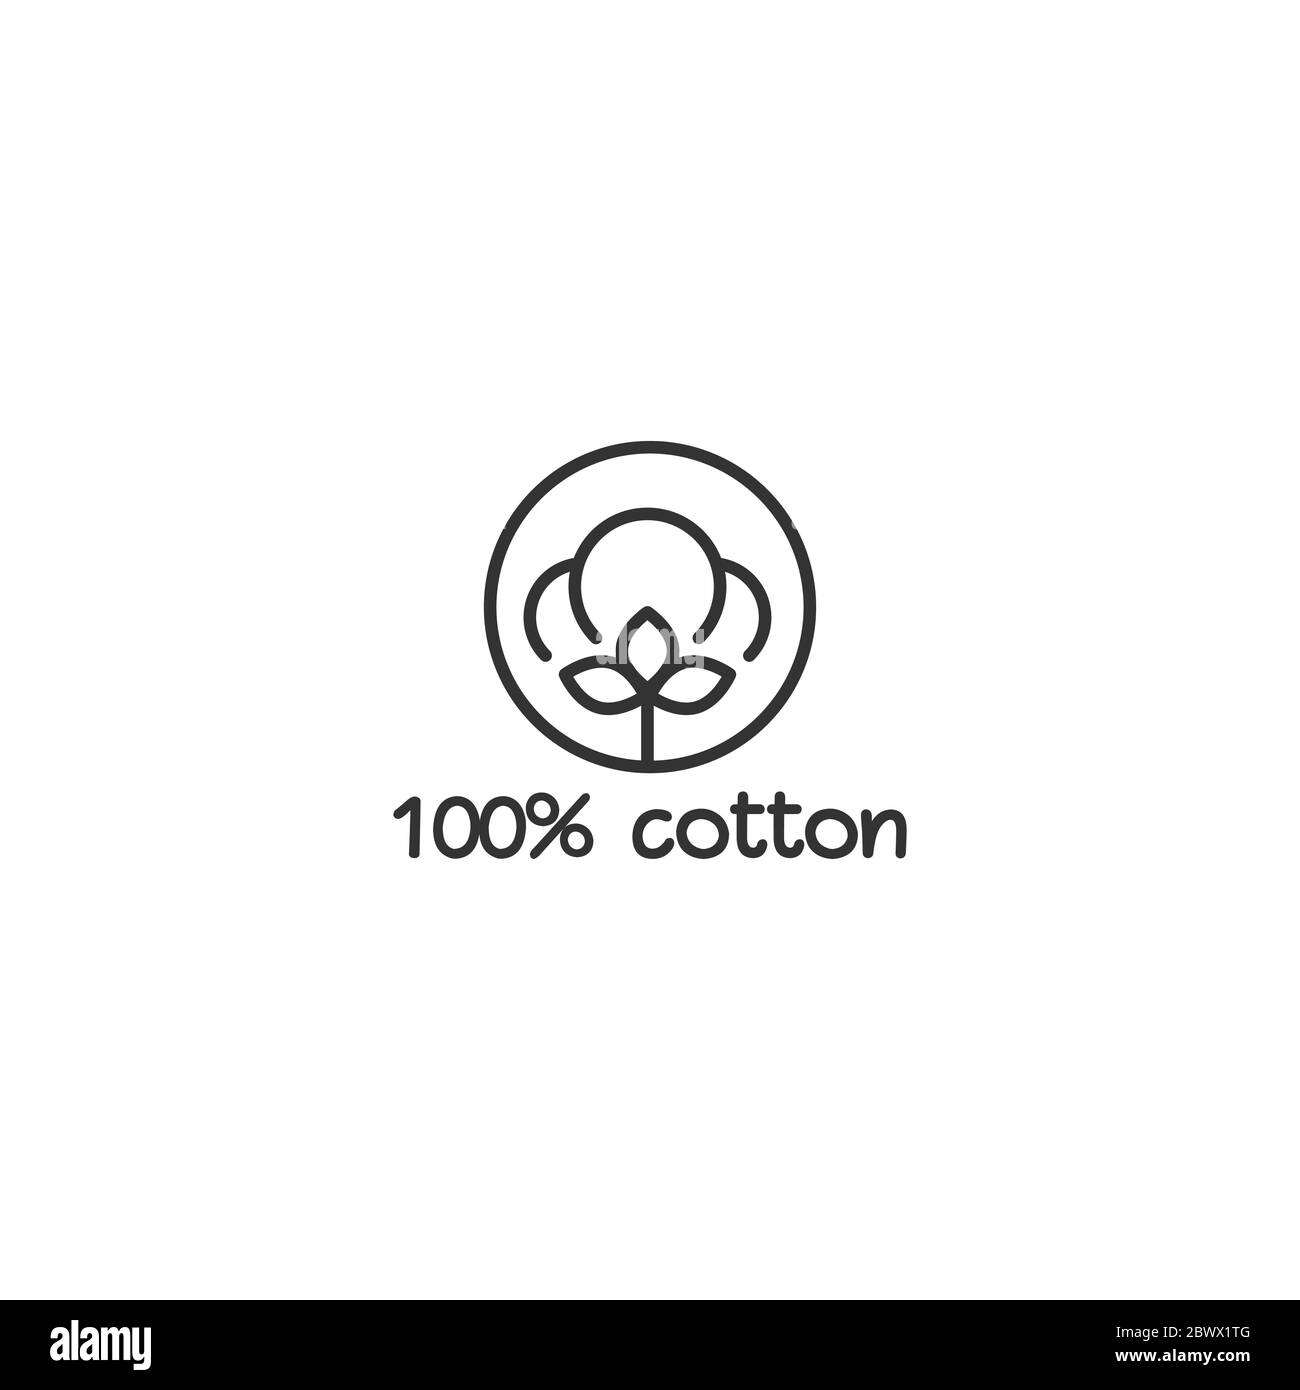 Cotton seed icon. 100 cotton -linear label. Natural fiber sign. organic ...